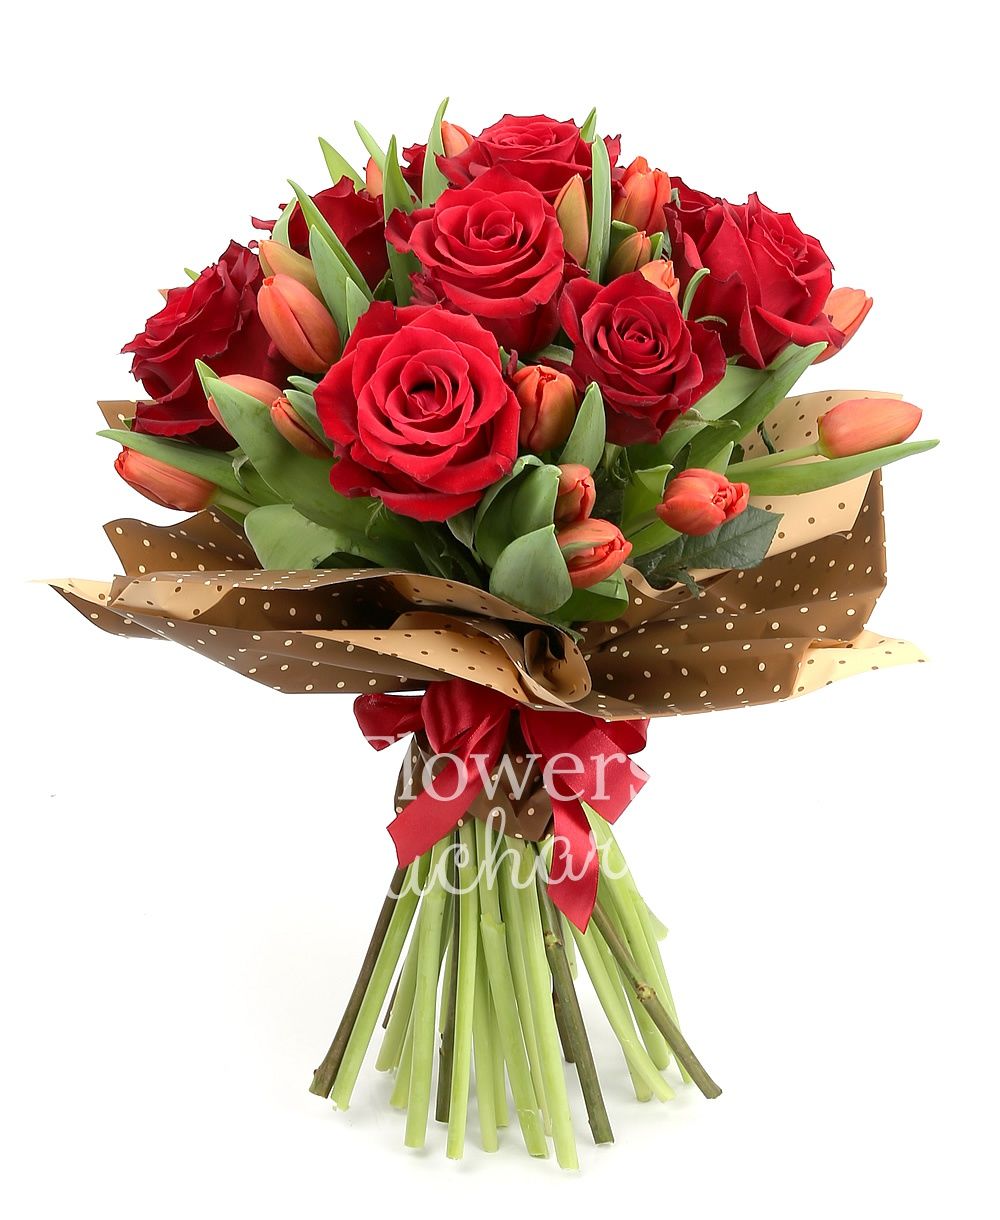 9 red roses, 20 red tulips, greenery